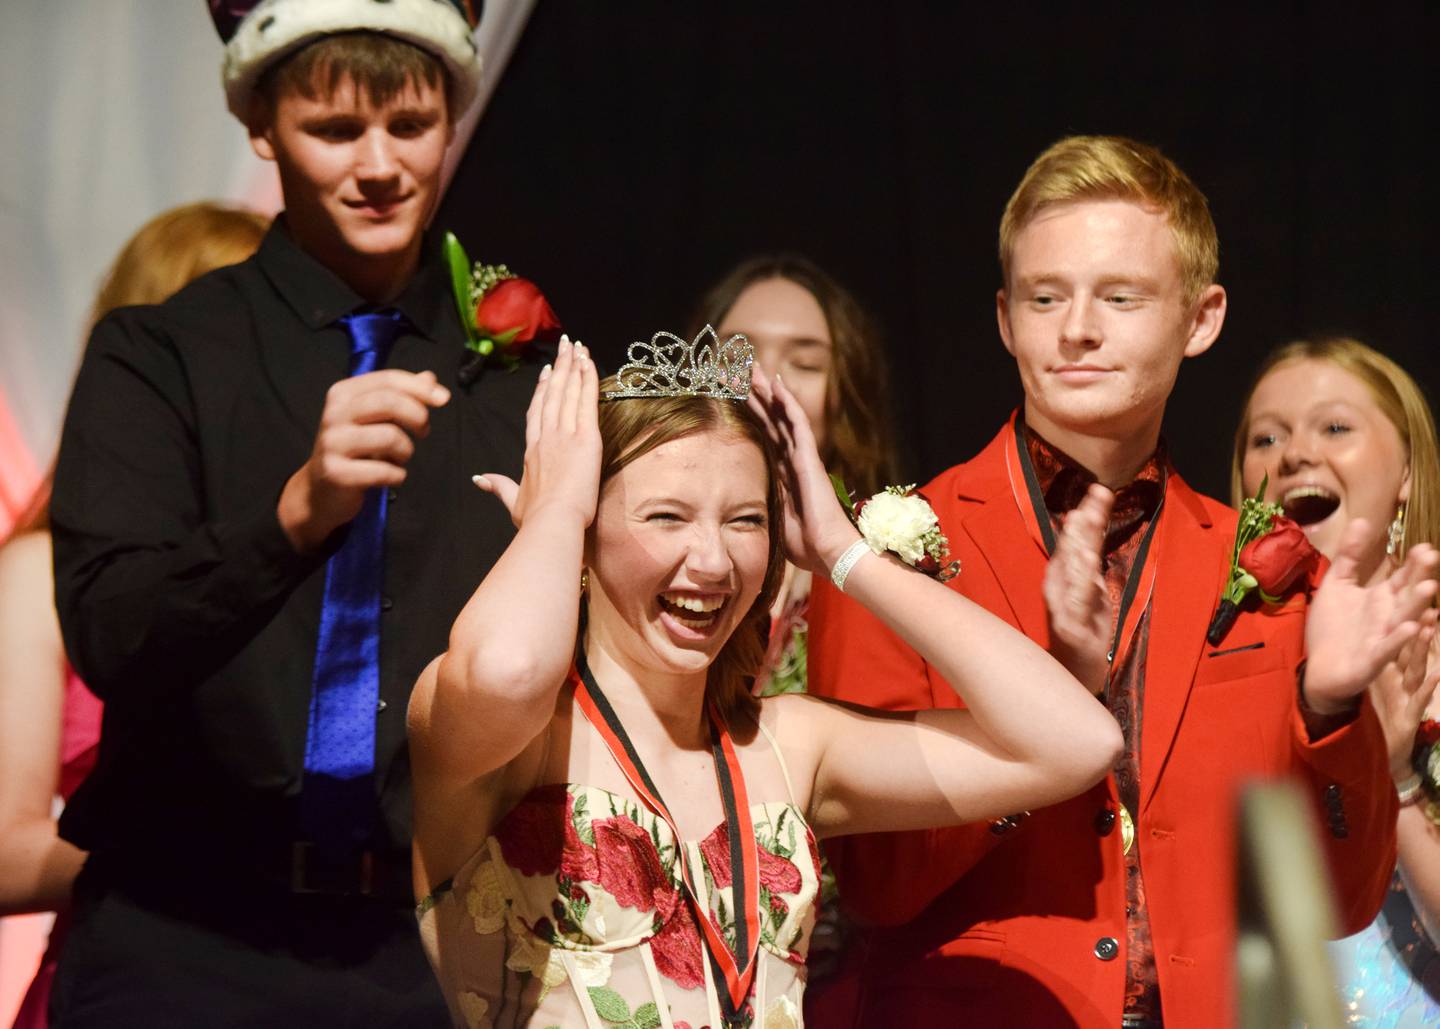 Kaitlyn Bloom, a senior at Newton High School, reacts to being crowned homecoming queen during a coronation ceremony on Sept. 15 inside the high school gymnasium.